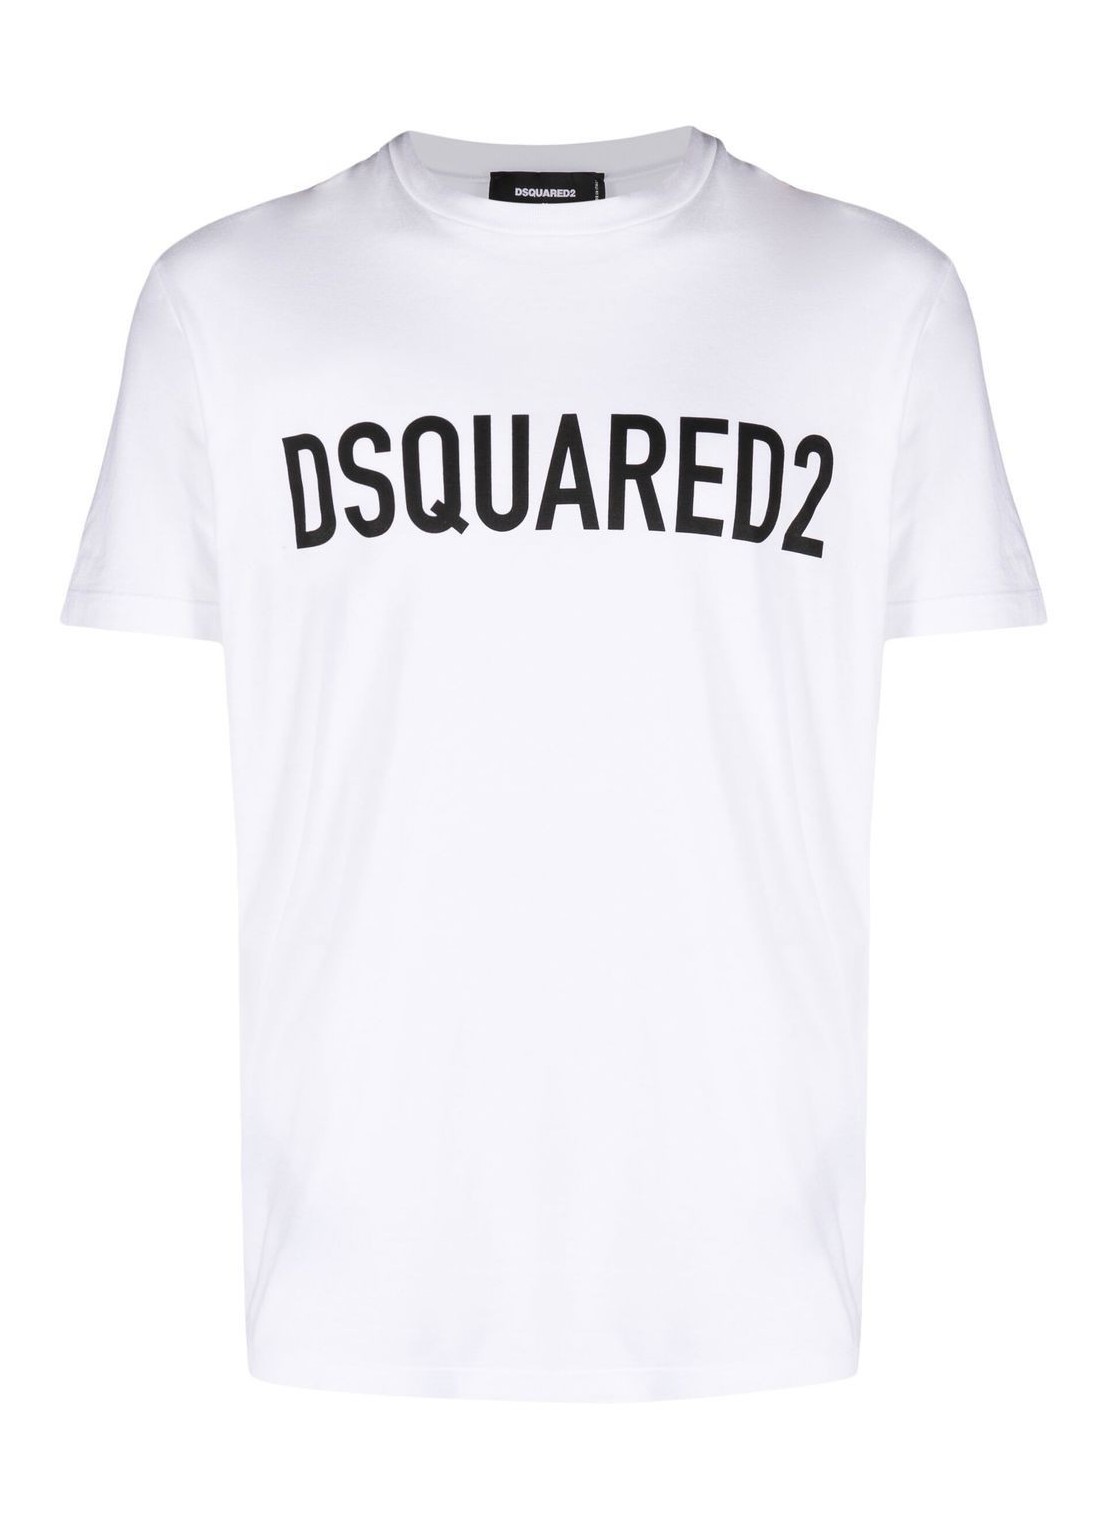 Camiseta dsquared t-shirt man dsquared2 cool tee s74gd1126s24321 100 talla XL
 